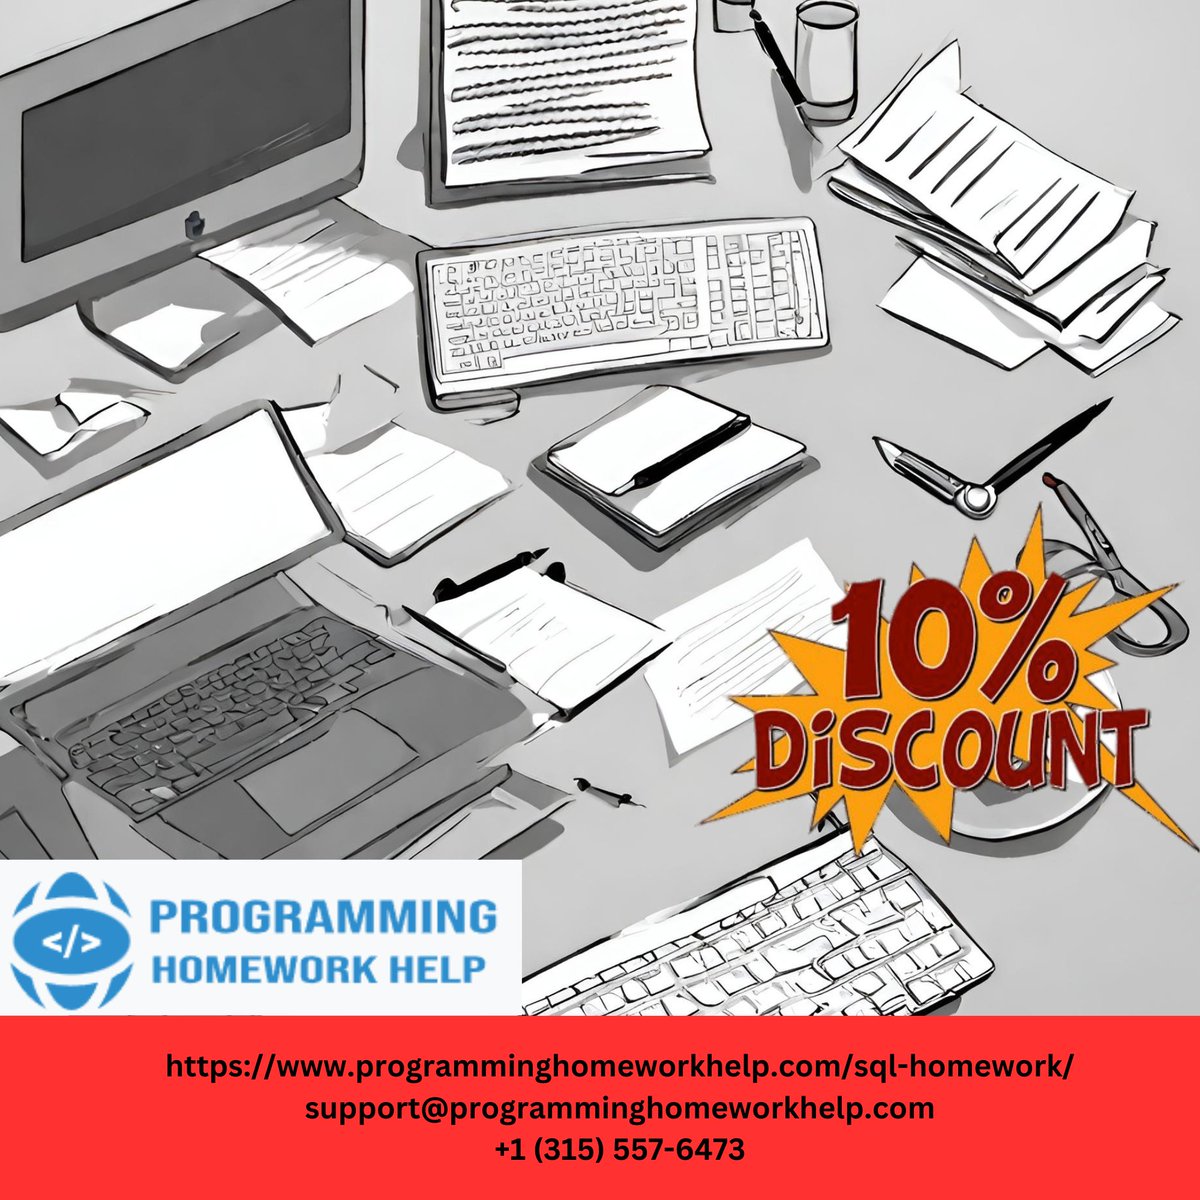 Elevate your SQL skills with ProgrammingHomeworkHelp.com! 💻 Need help with sql assignment? We've got your back! Avail our expert assistance and unlock a 10% discount today. Use code SQL10. Let's code your success story together! 📊 #ProgrammingHelp #SQLAssignment #CodingSuccess